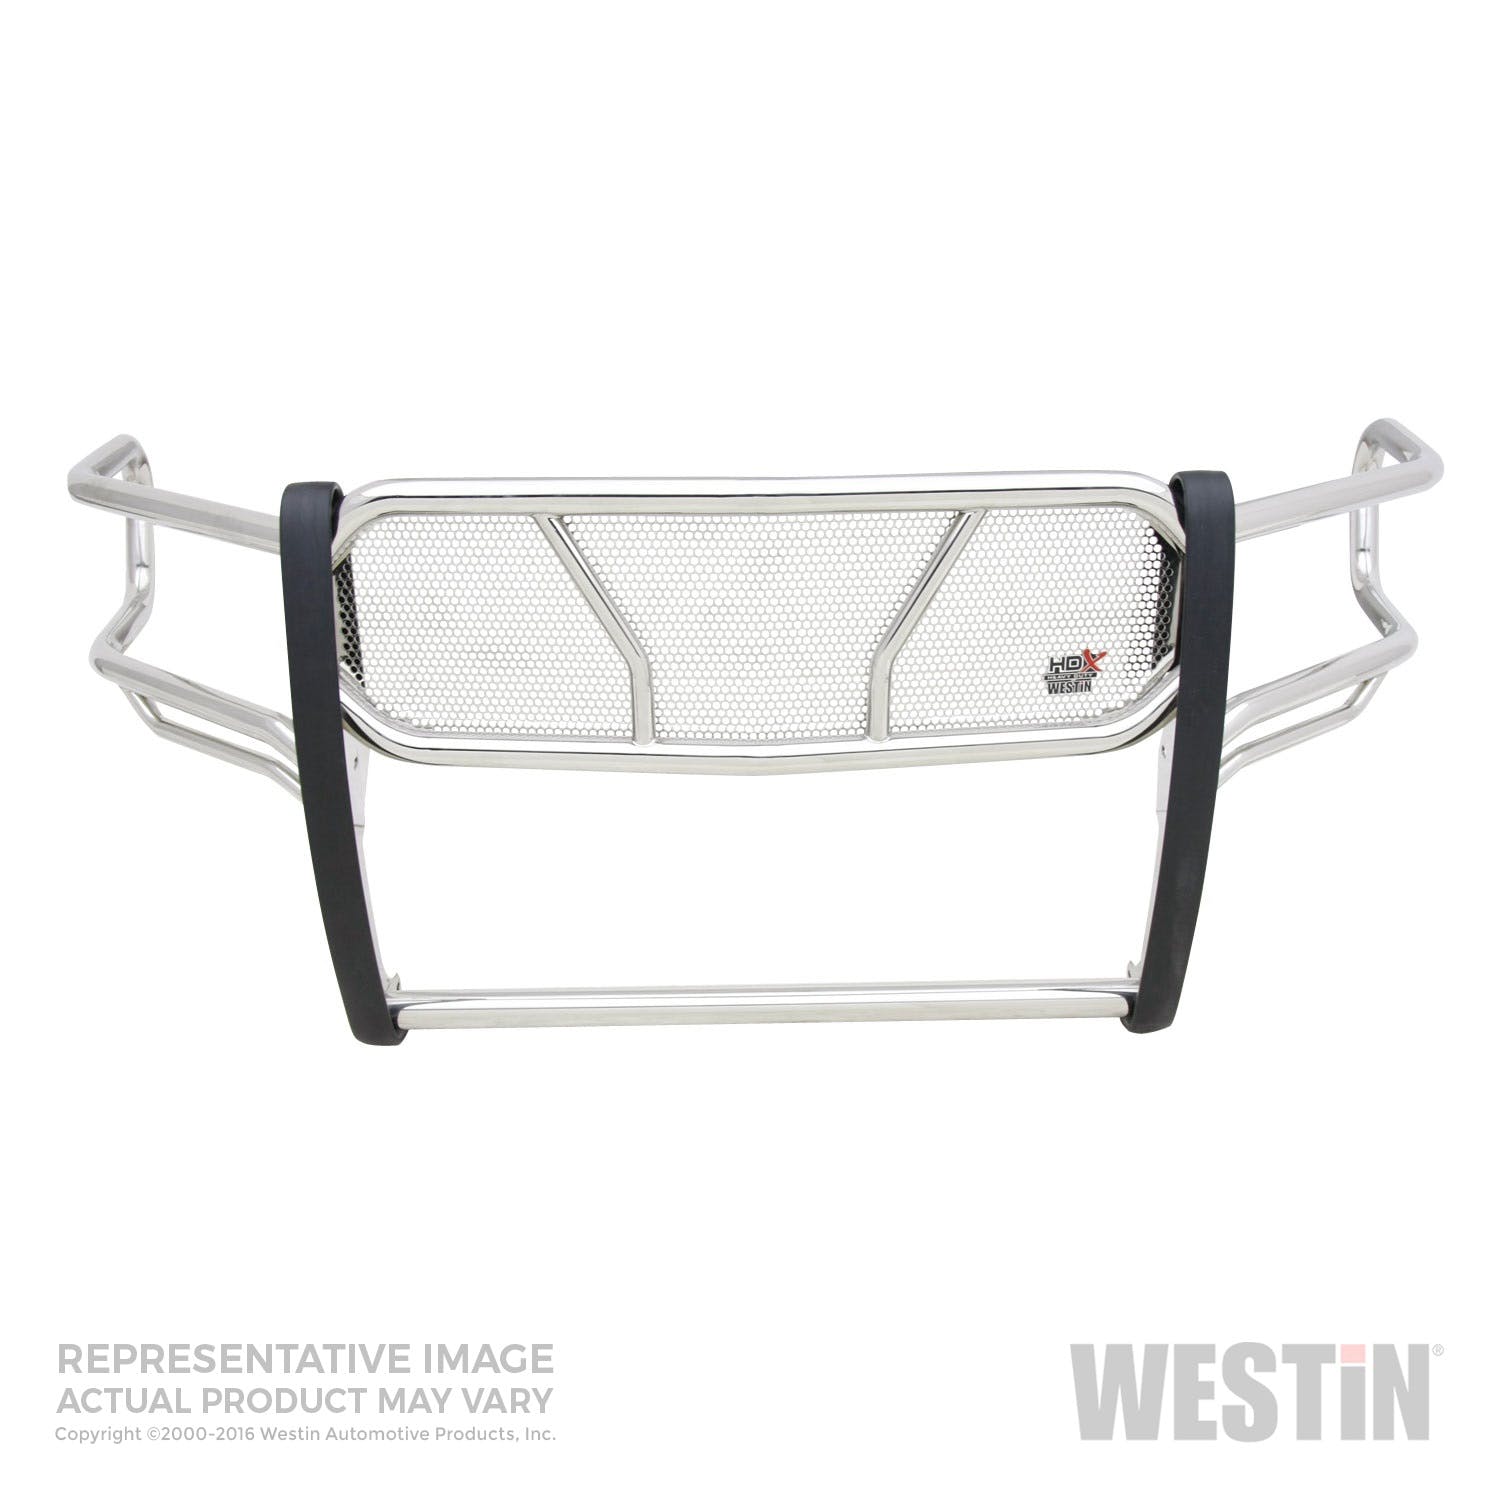 Westin Automotive 57-3900 HDX Grille Guard Stainless Steel